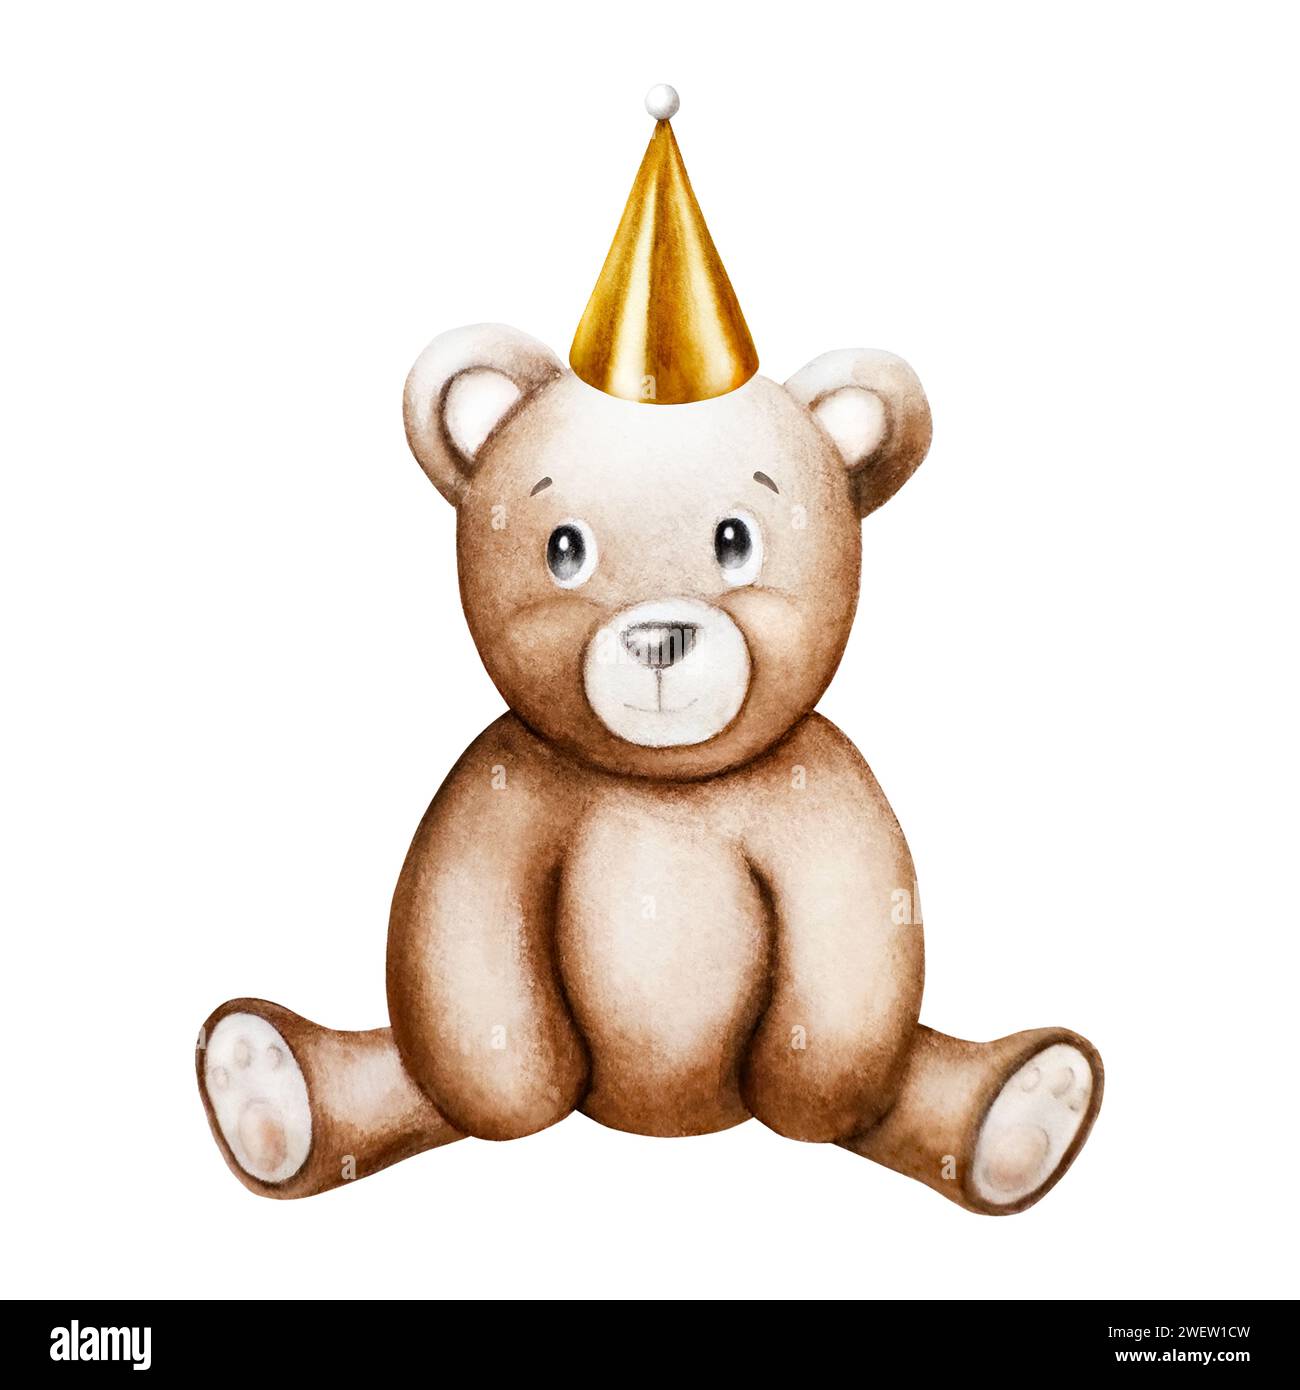 Watercolor cute cartoon teddy bear with golden birthday, holiday cap. Hand drawn baby illustration isolated on white background. Lovely toy for baby a Stock Photo